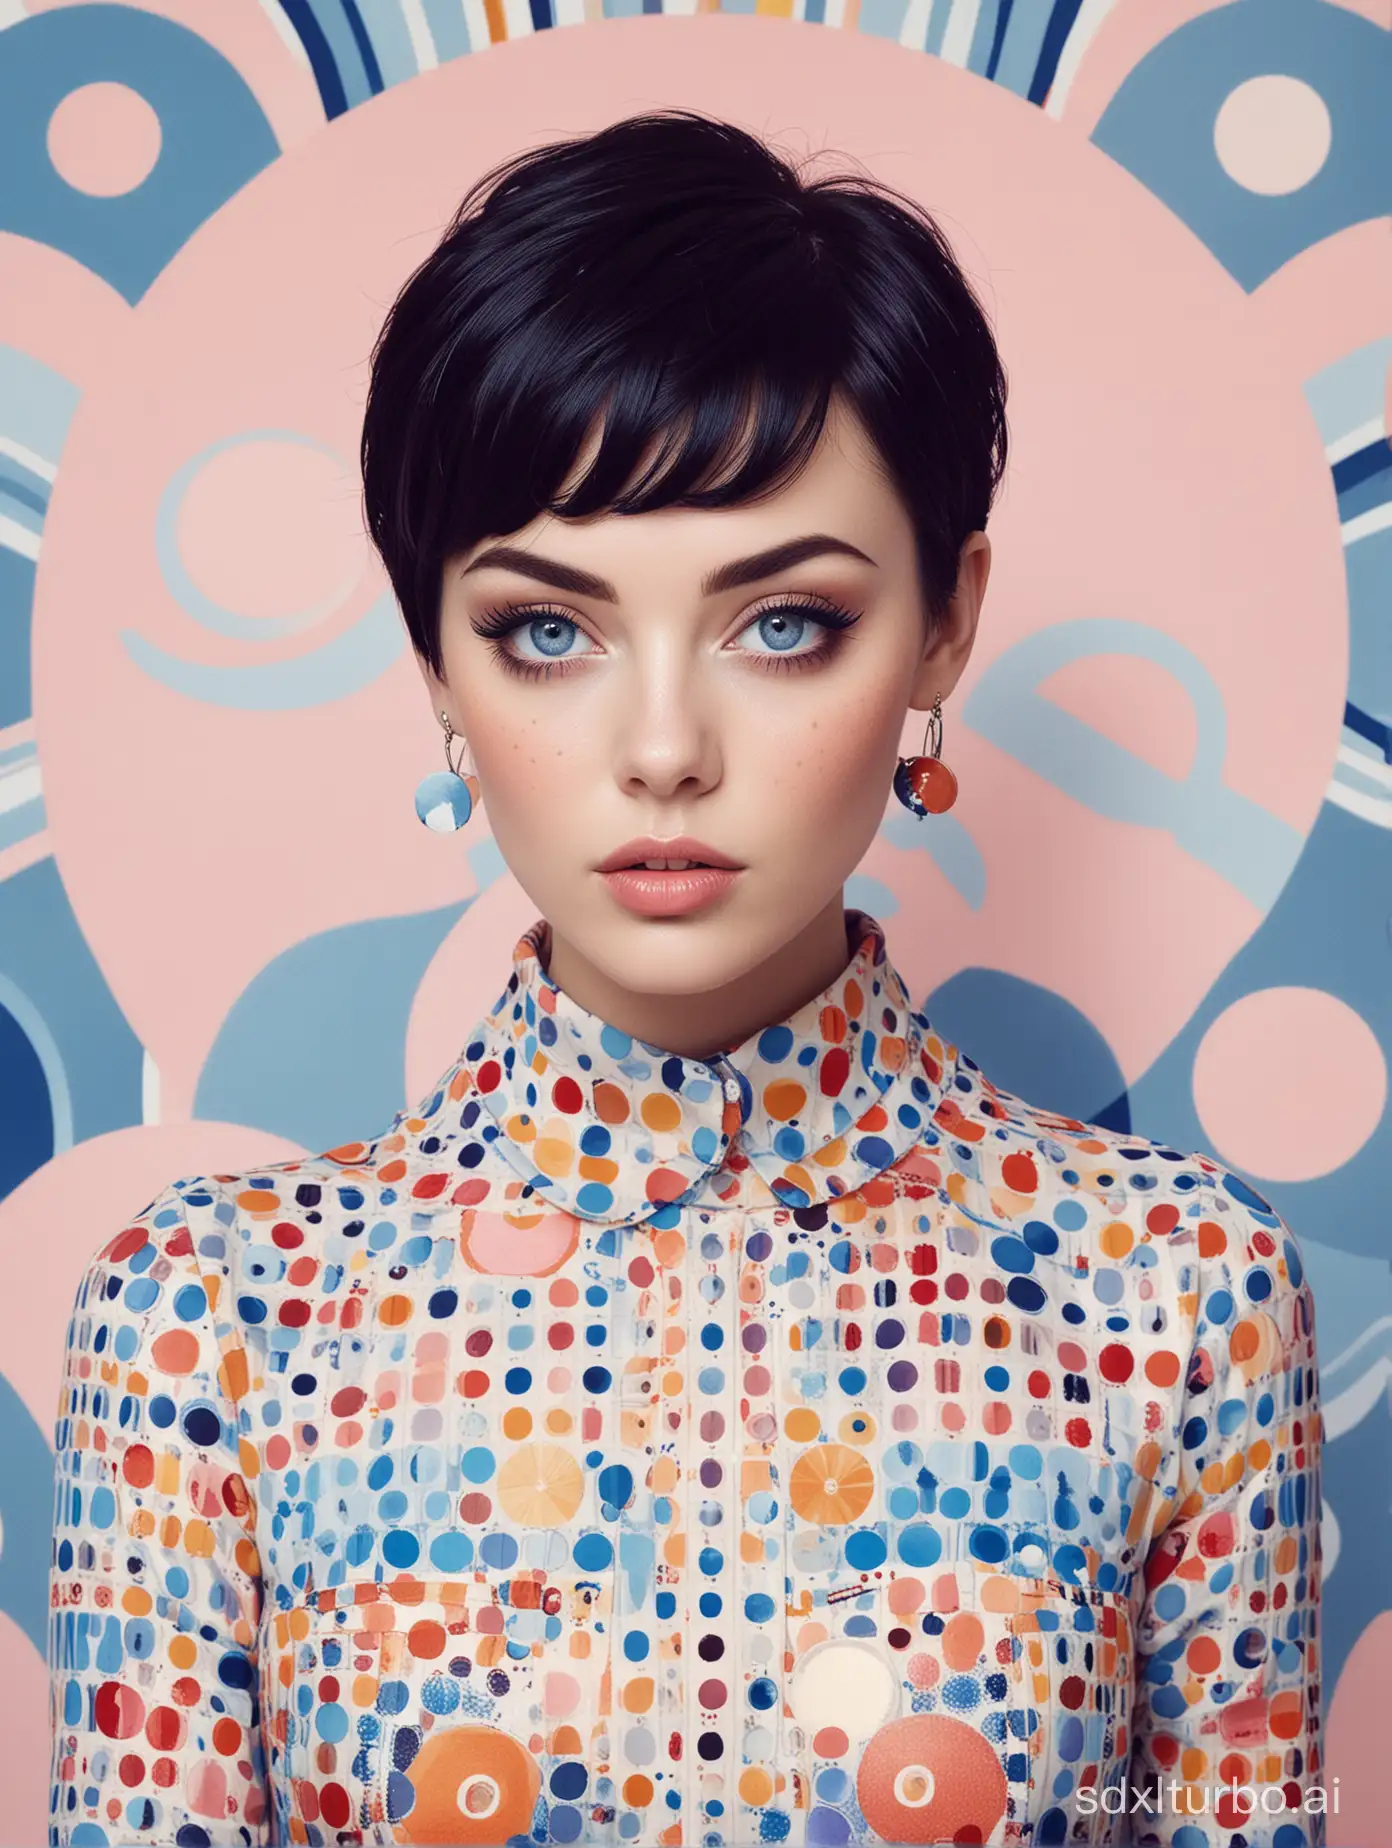 fashion photography of A beautiful woman with short black hair and blue eyes, wearing polka dot in the style of Camilla d'Errico, full body portrait, with a background of colorful circles, geometric shapes, surrealist style artwork, detailed facial features, painted illustrations, patterned wallpaper, and psychedelic art.